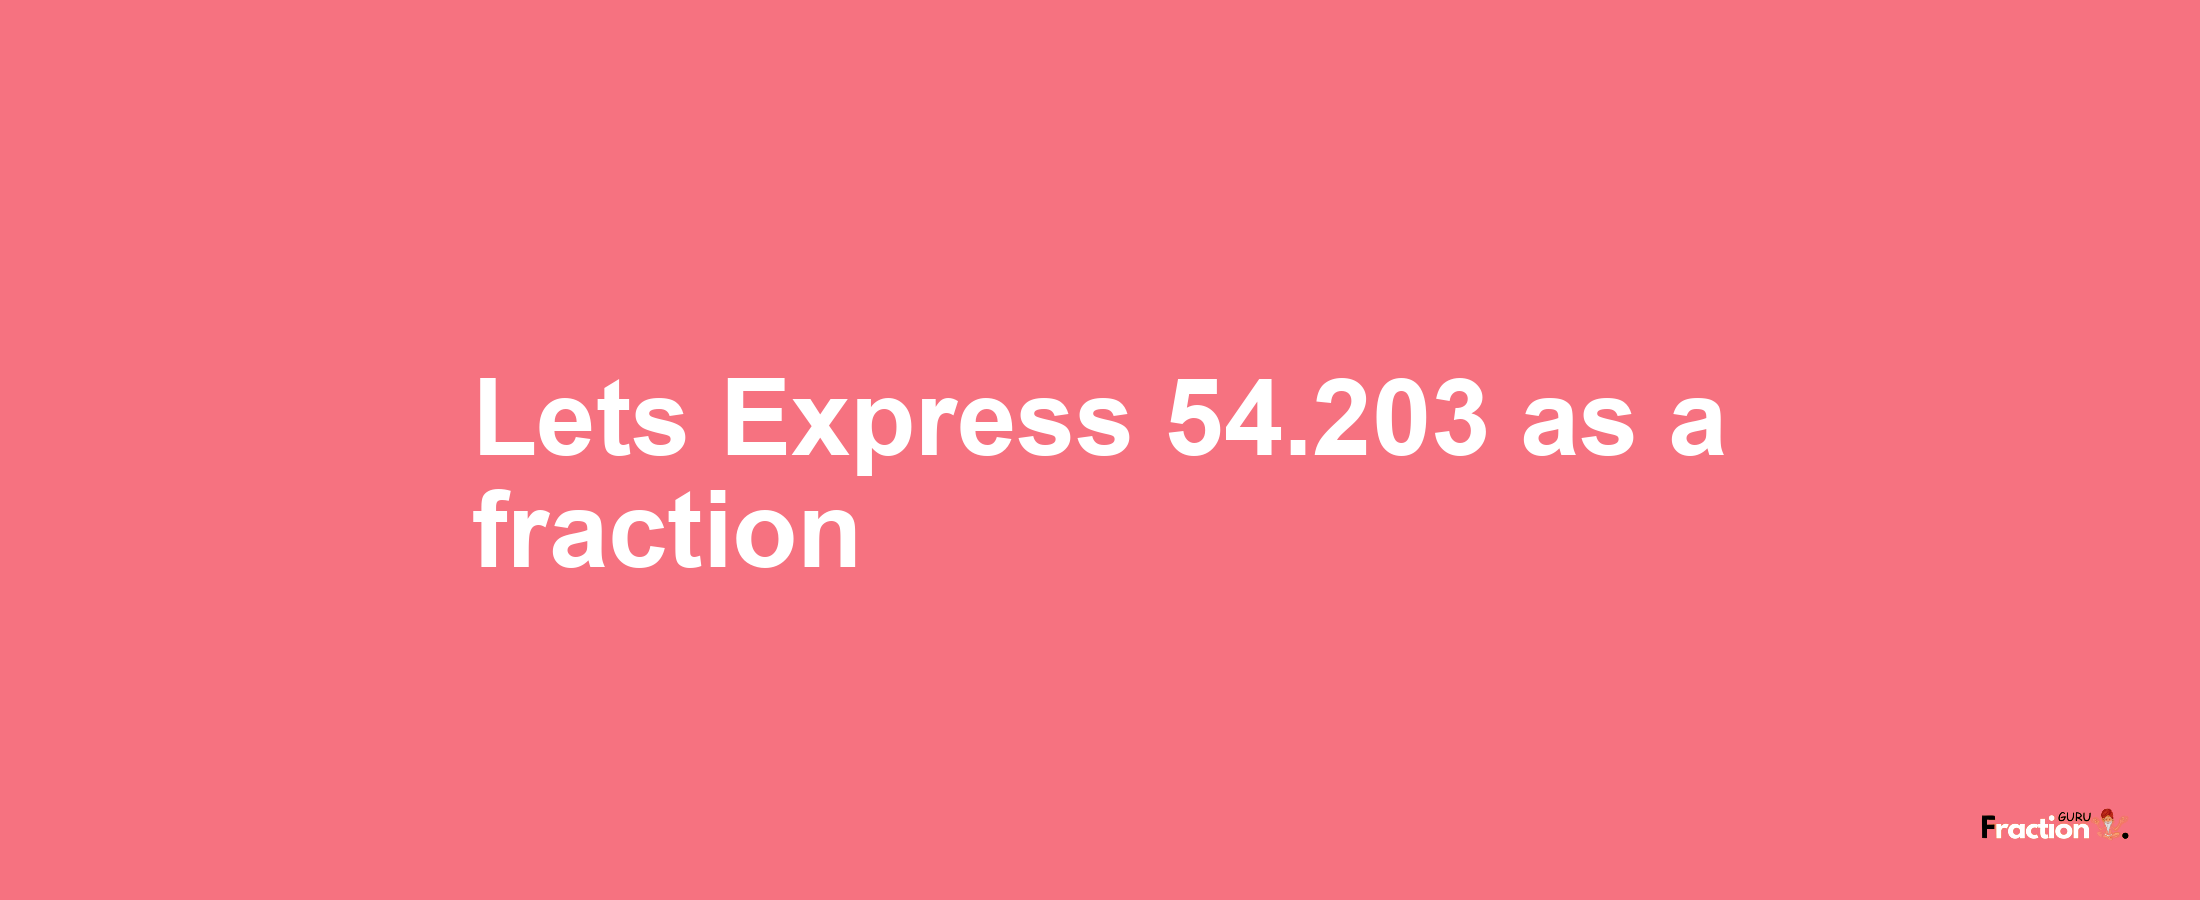 Lets Express 54.203 as afraction